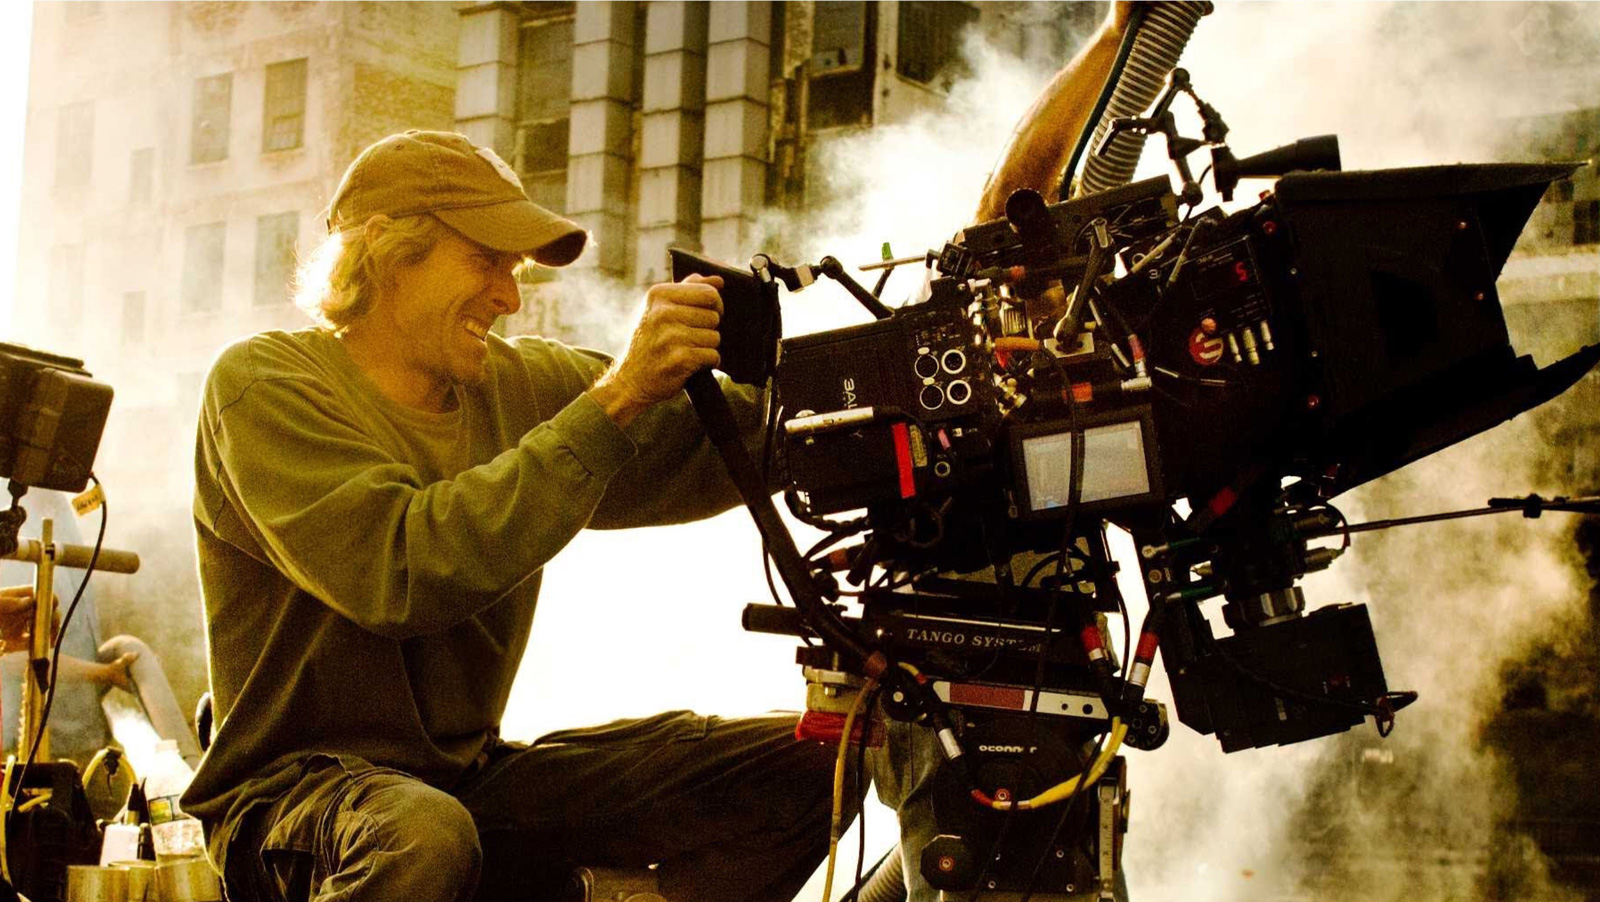 New Transformers 5 set video and images tease explosive action GamesRadar+ pic